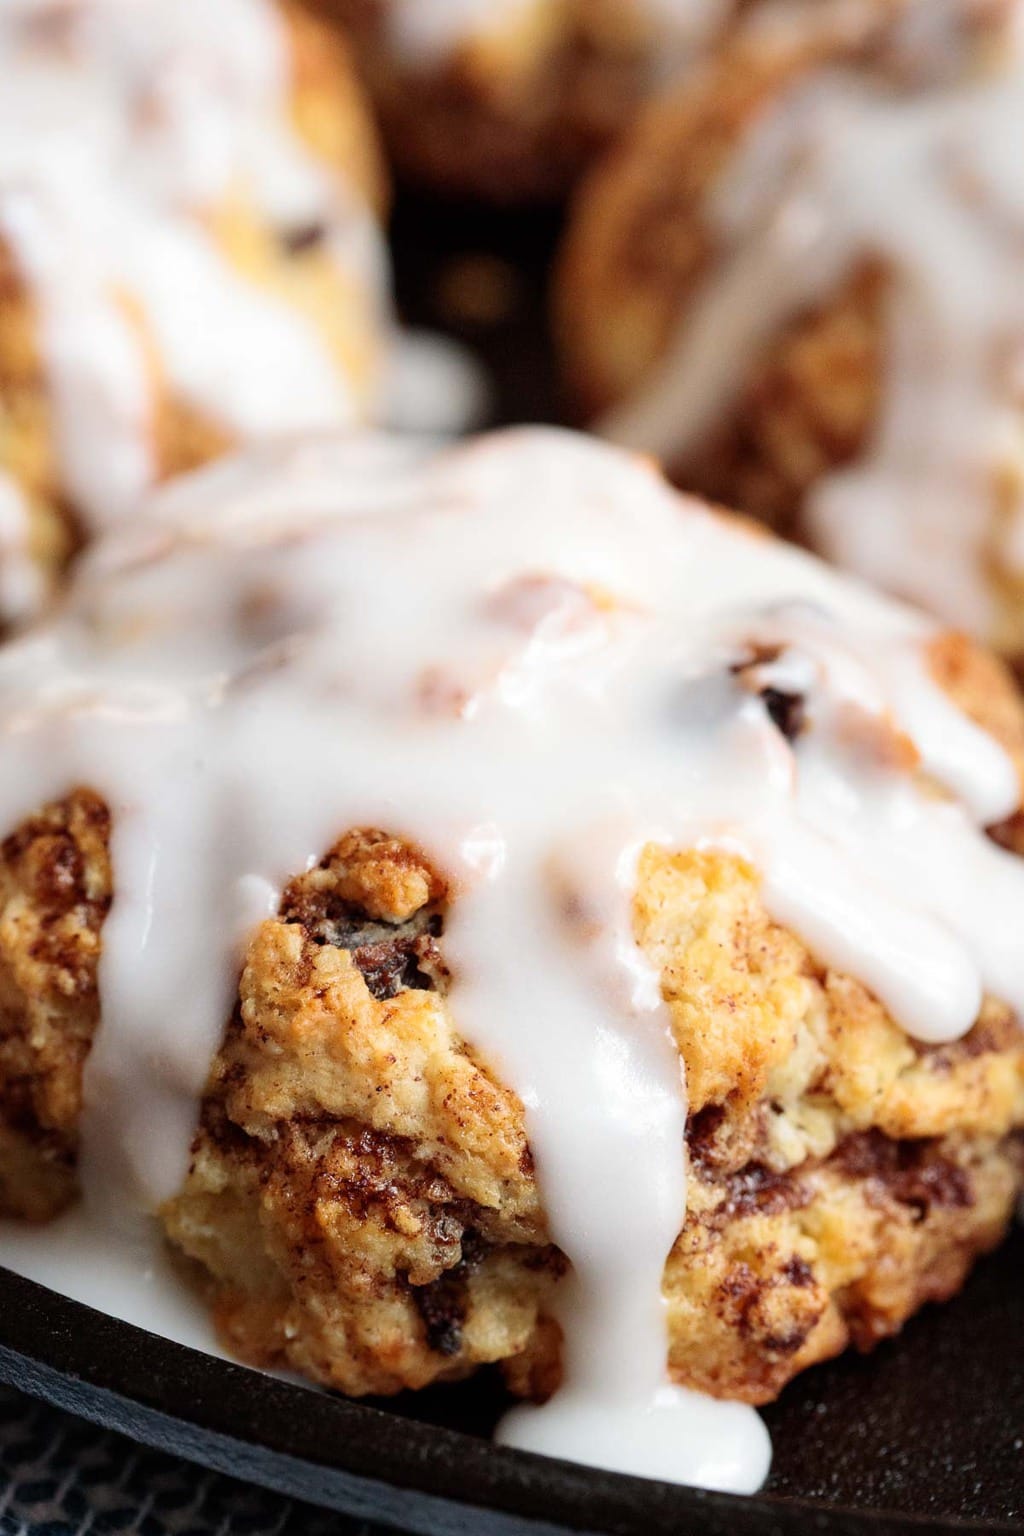 Ultra closeup photo of a Ridiculously Easy Cinnamon Raisin Buttermilk Biscuit.